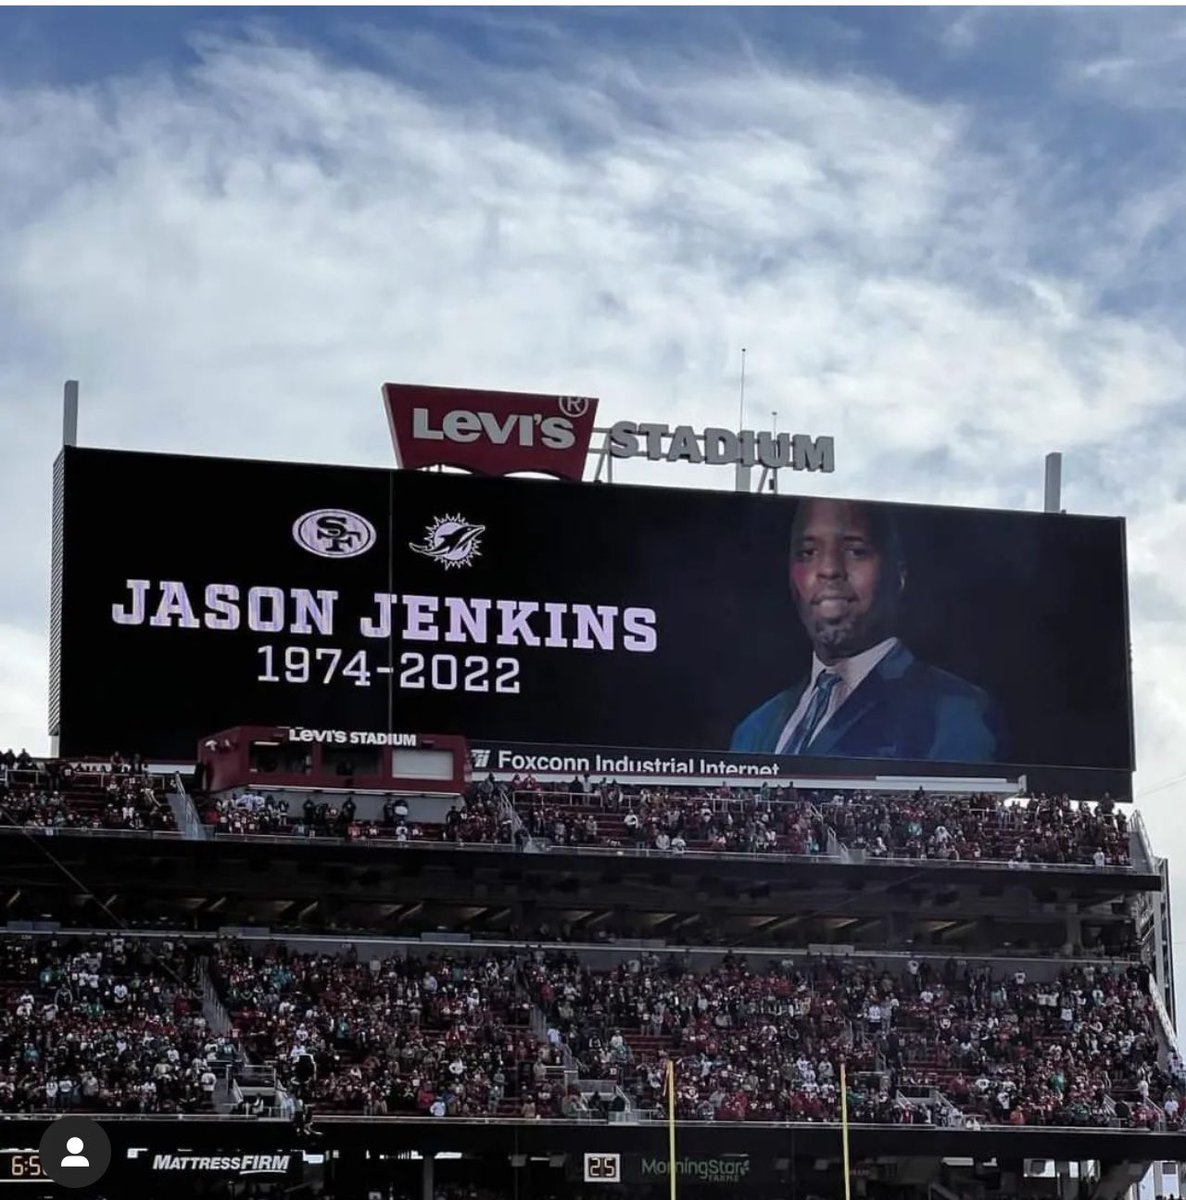 At the airport now, heading back to #Miami, but wanted to share an awesome moment from the @49ers game honoring Jason Jenkins. Staff members were also wearing “JJ” pins. JJ’s impact across the #NFL was profound. You are missed 🙏 #RIP #FinsUp #FTTB #MondayMorning